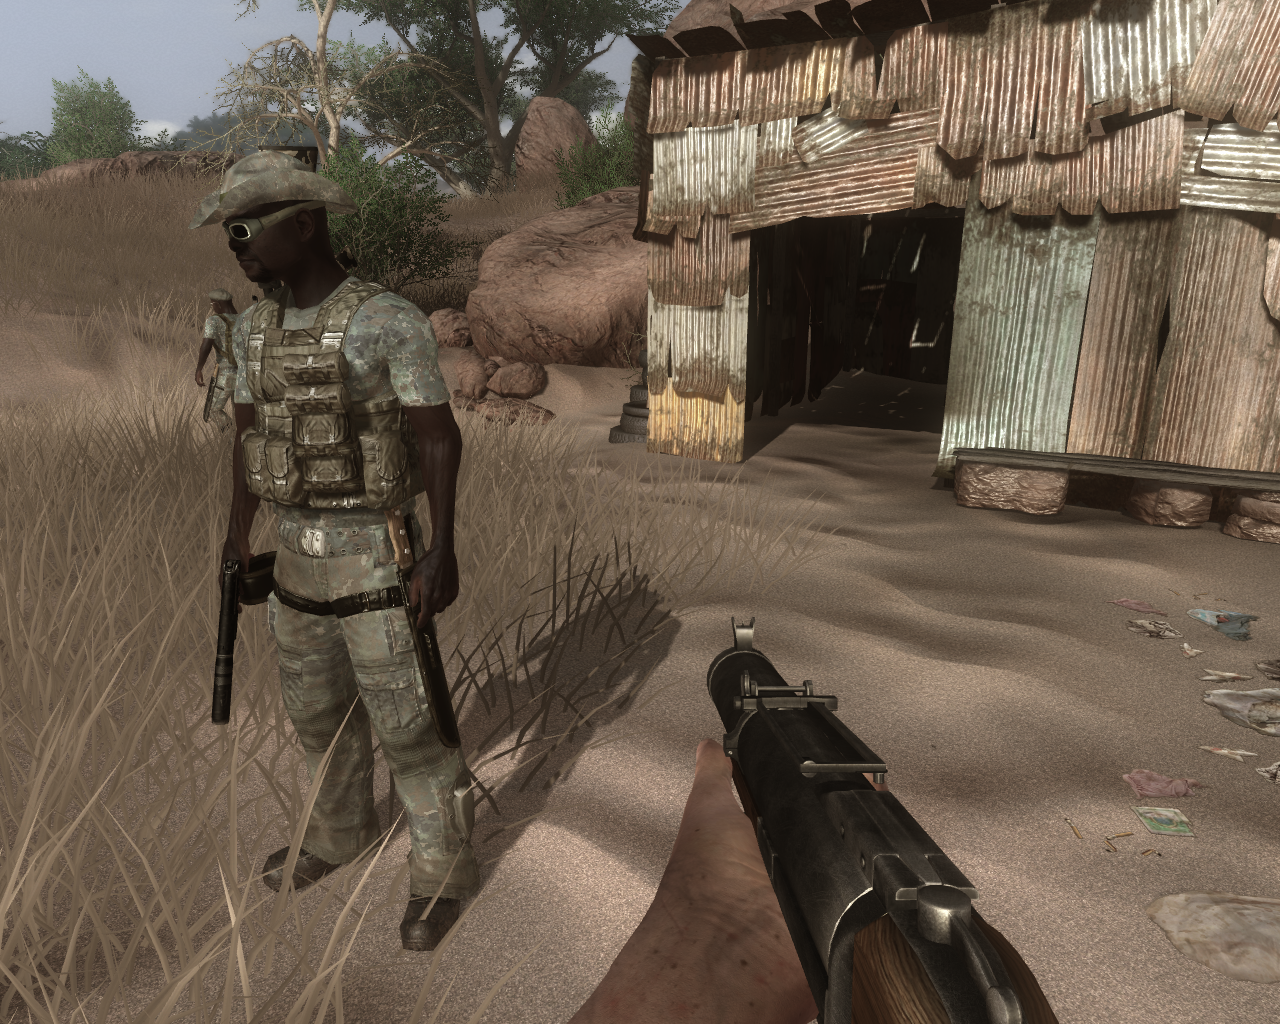 New Merc Outfits And Camo Upcoming Feature Image Infamous Fusion Mod For Far Cry 2 Moddb 